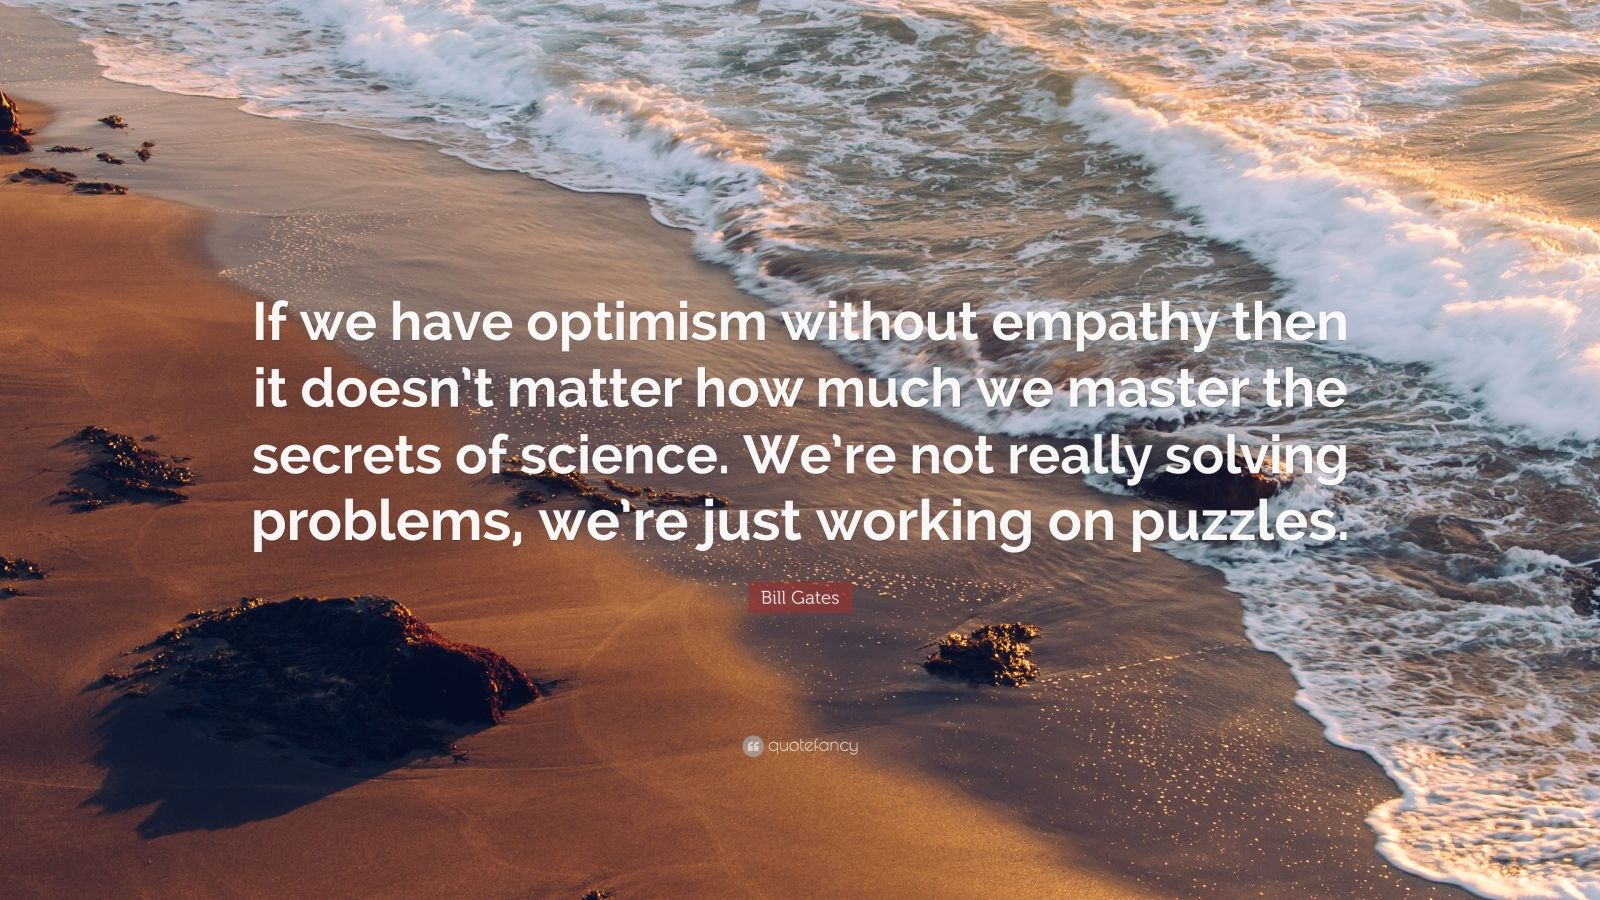 Bill Gates Quote: “If we have optimism without empathy then it doesn’t